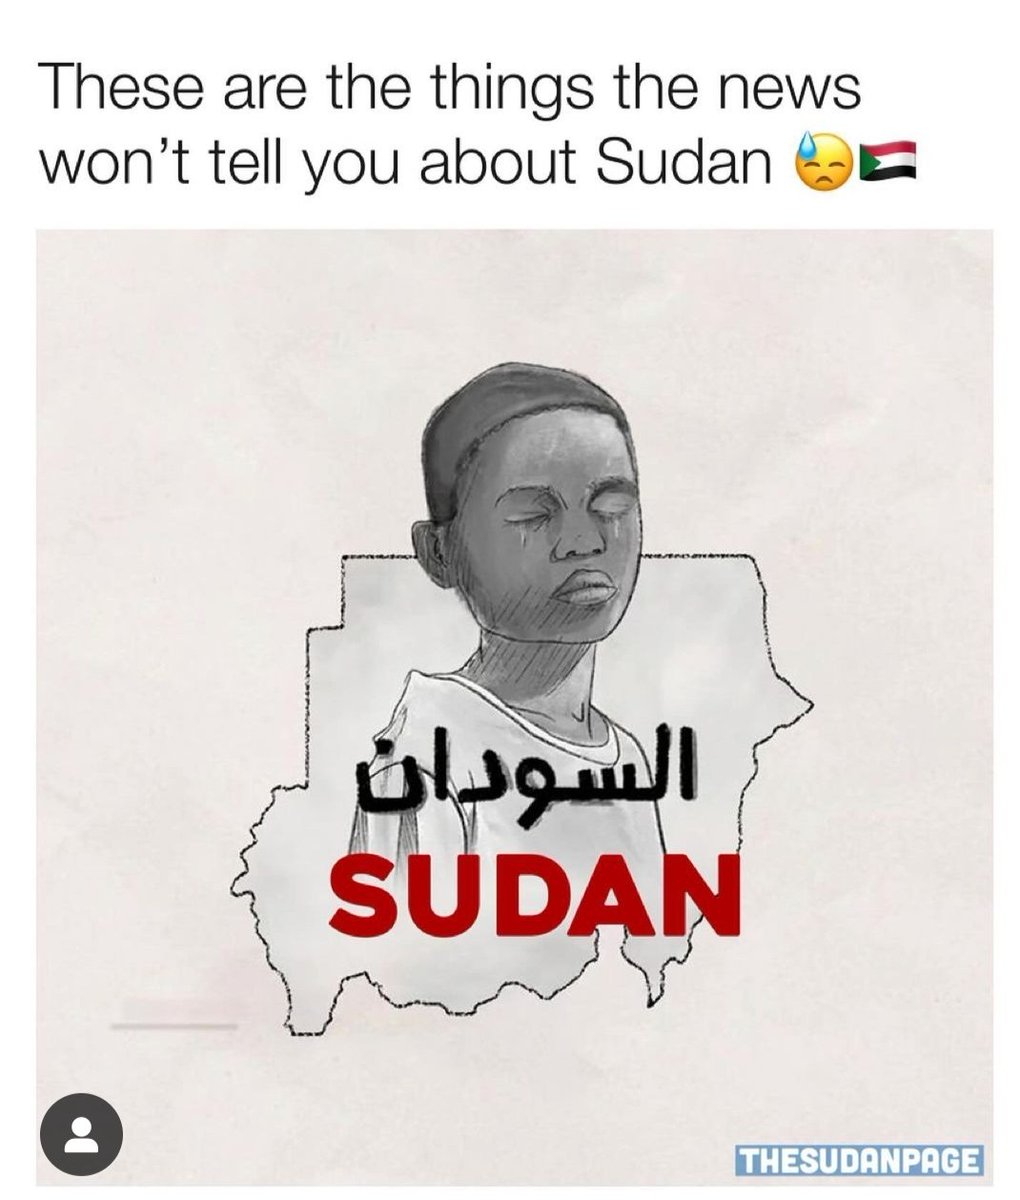 Another thread on Sudan since y'all don't wanna pay any attention to Sudanese people